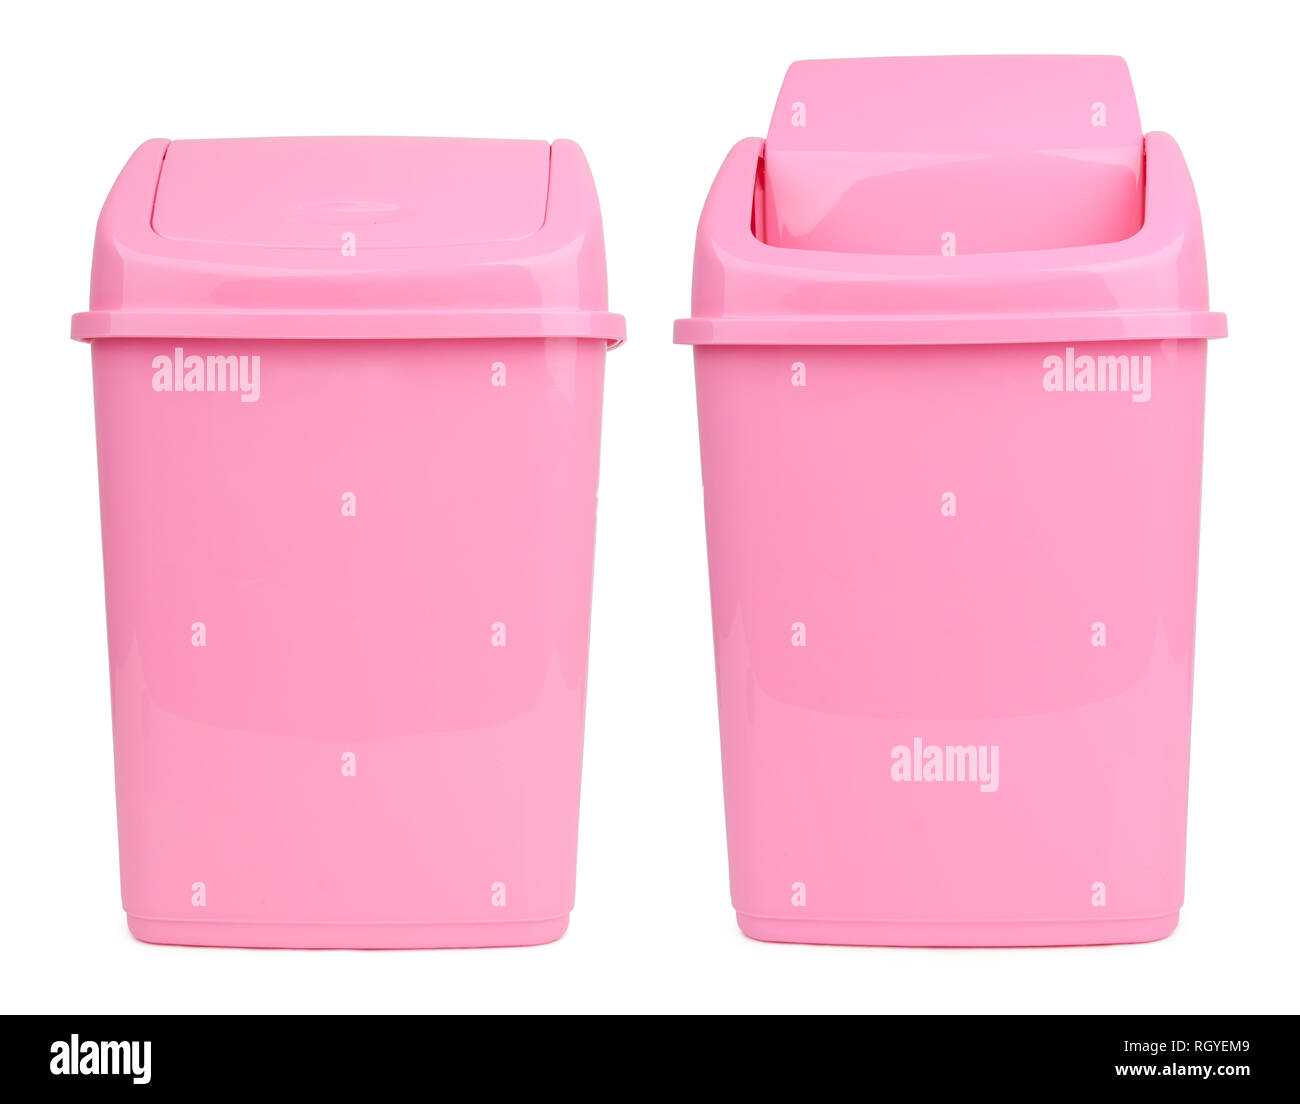 https://c8.alamy.com/comp/RGYEM9/pink-office-trashcan-isolated-on-white-background-RGYEM9.jpg